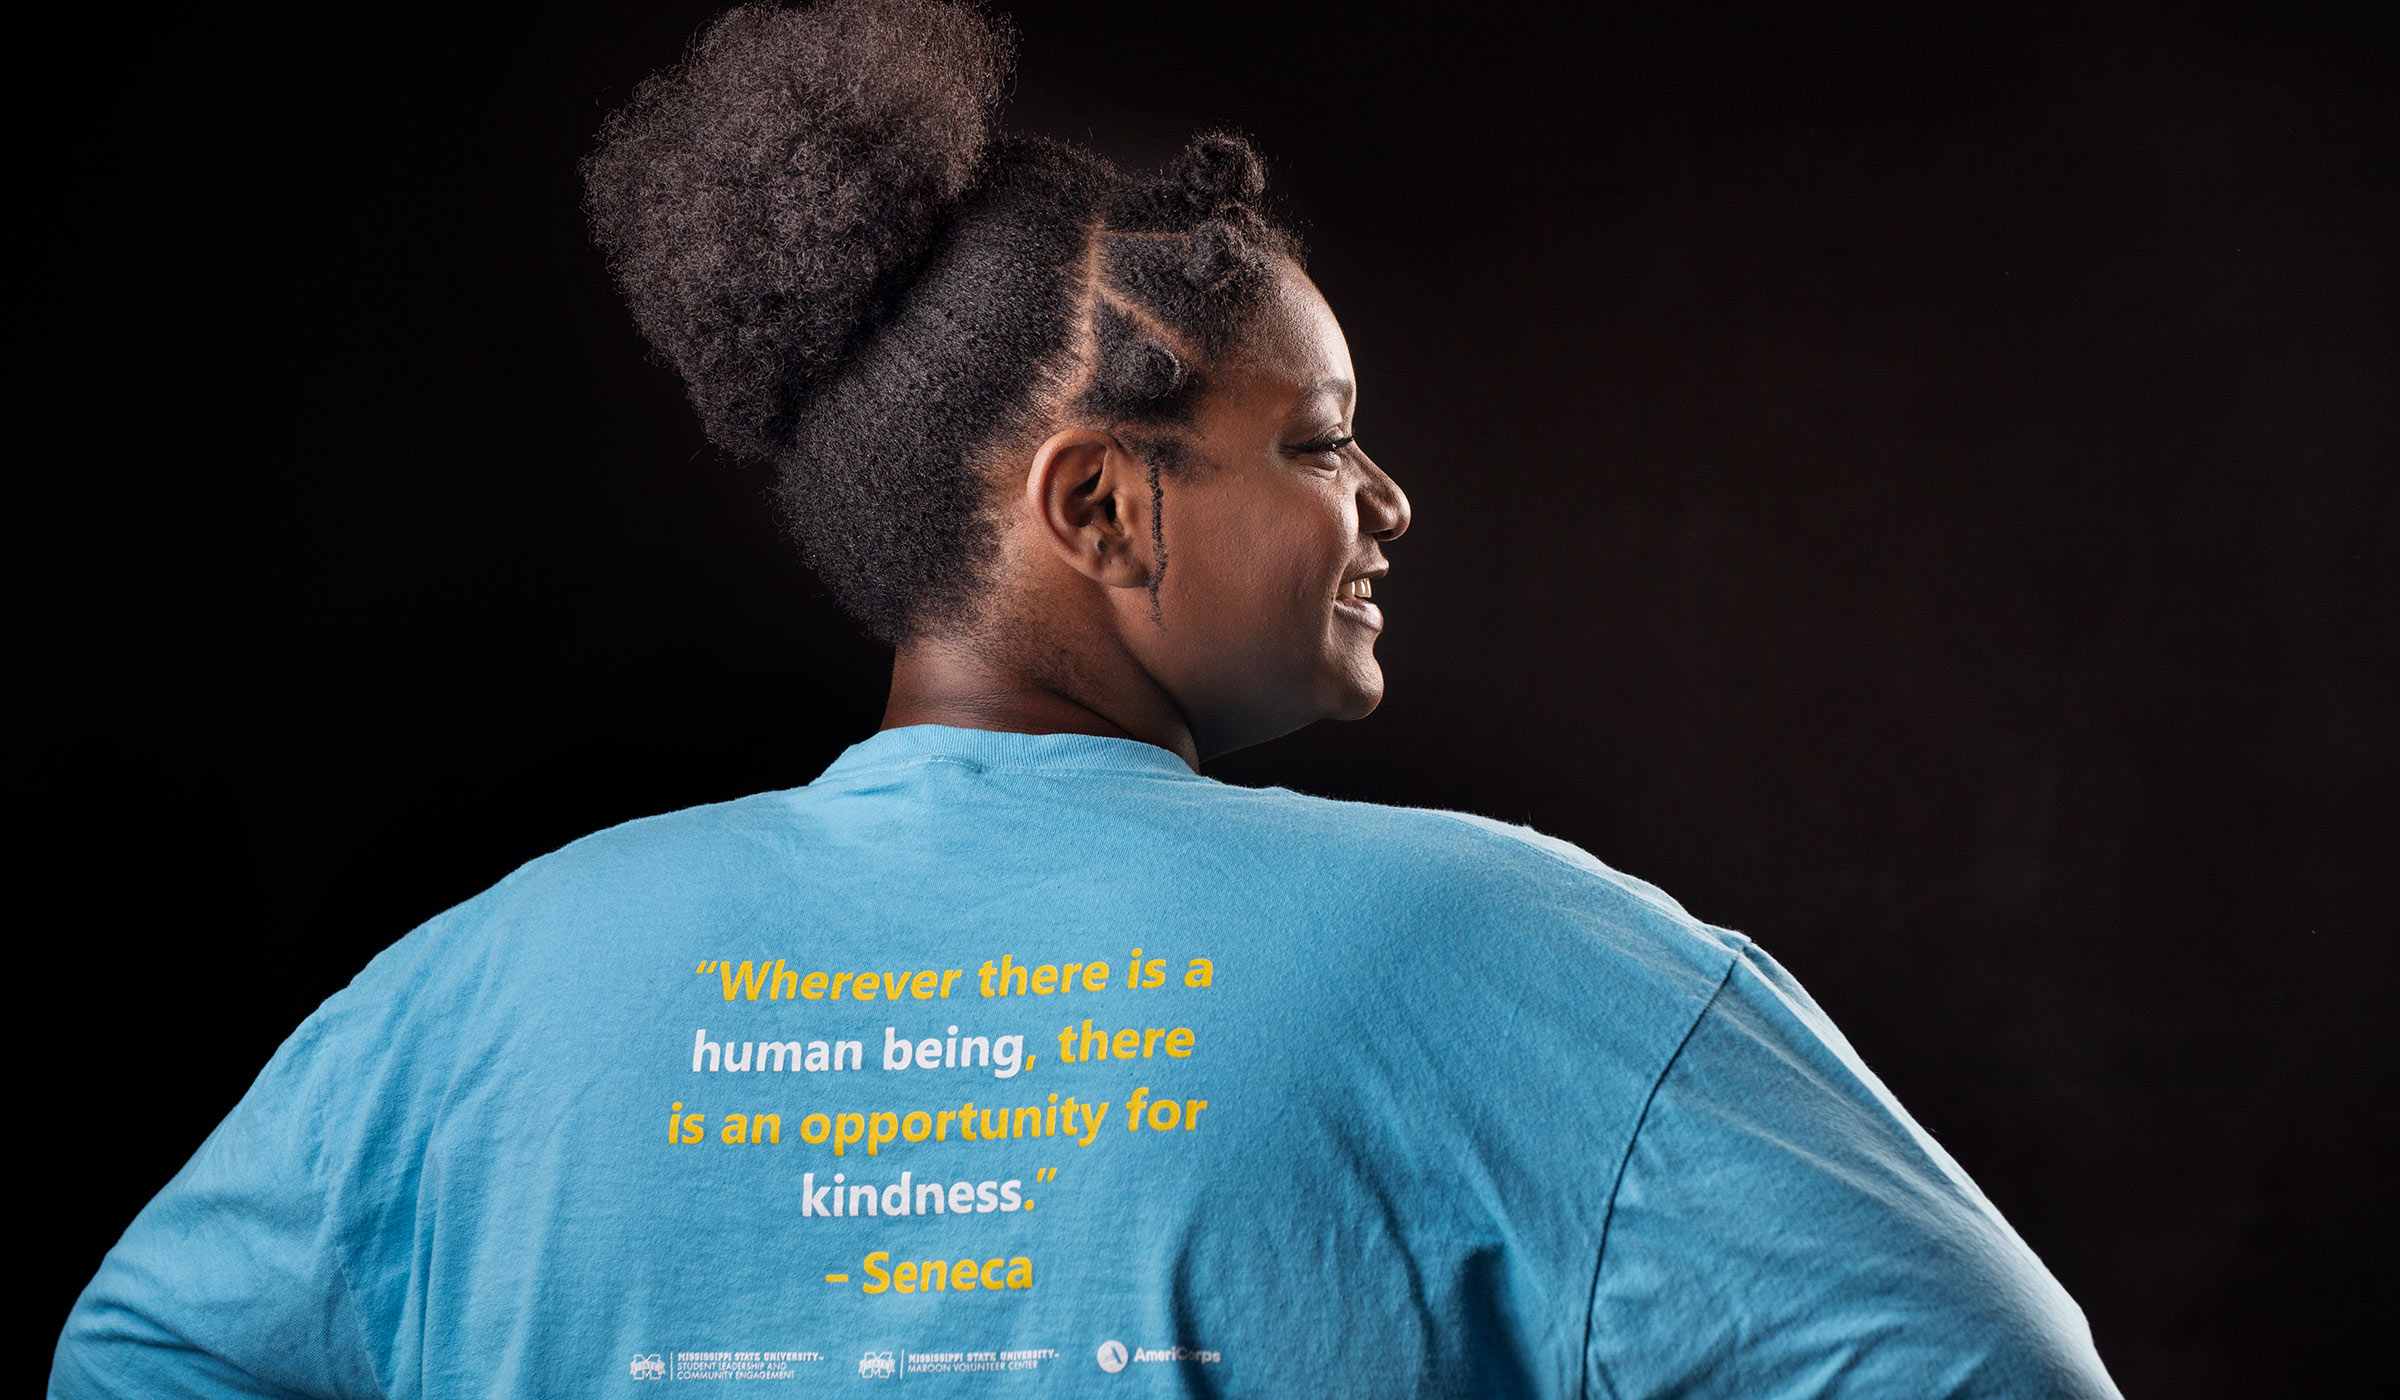 Alexis Wallace, pictured from behind, wearing a T-shirt with a quote that says "Wherever there is a human being, there is an opportunity for kindness." -- Seneca